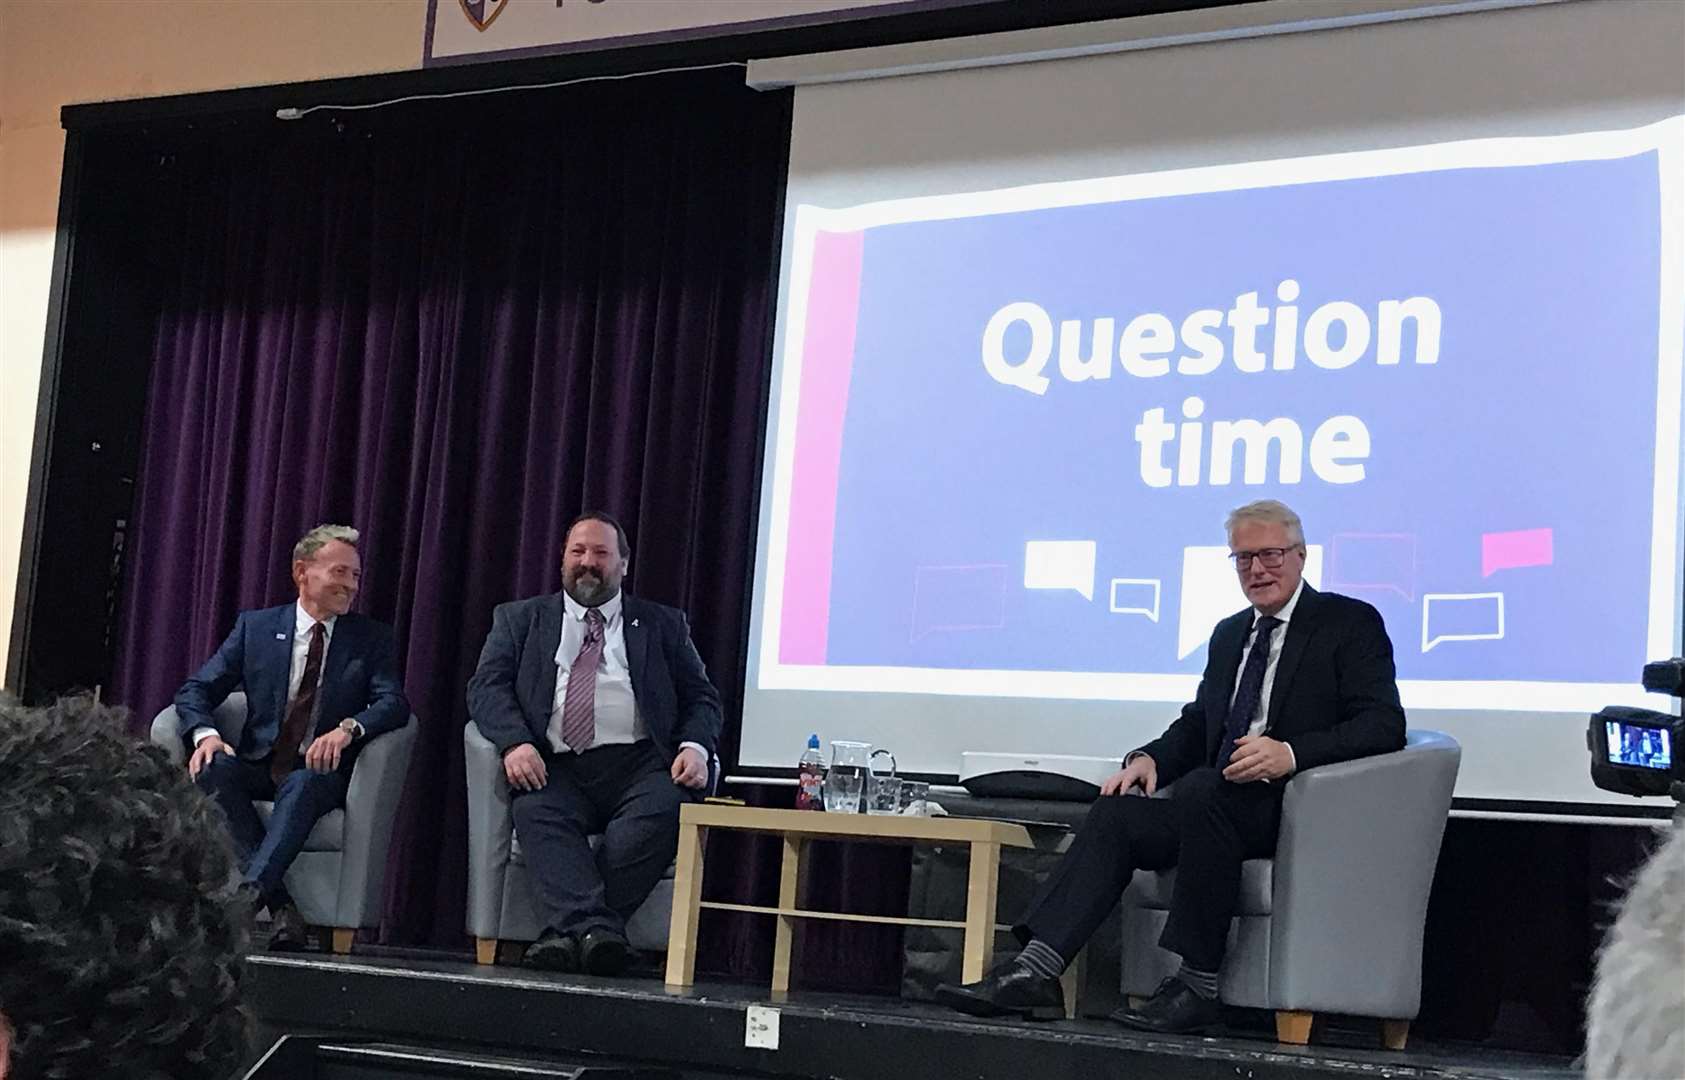 Another innovation introduced this year were Medway Matters events where the council leader Vince Maple and chief executive Richard Hicks answer questions from the public.